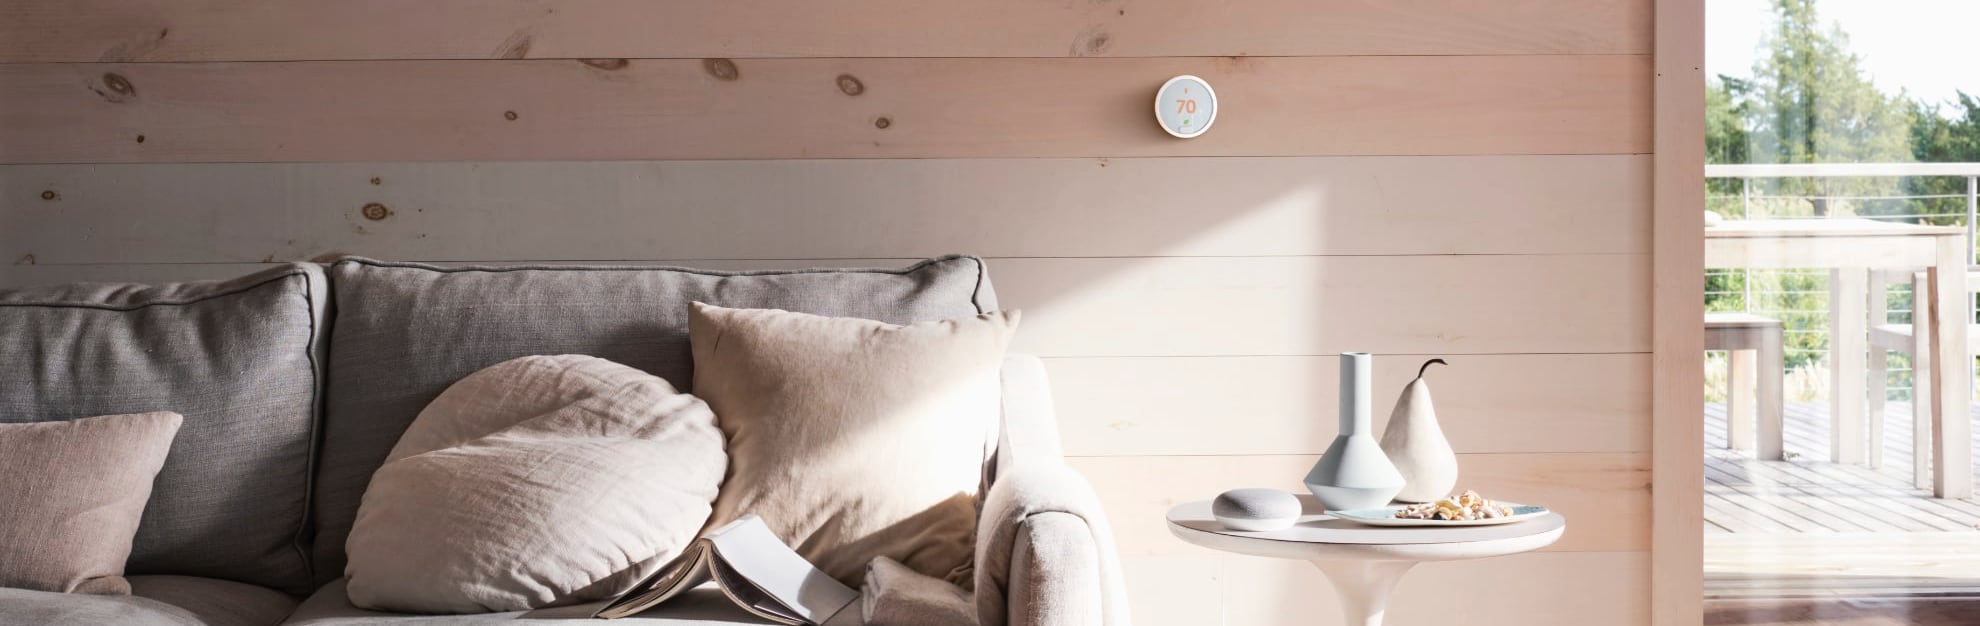 Vivint Home Automation in Los Angeles